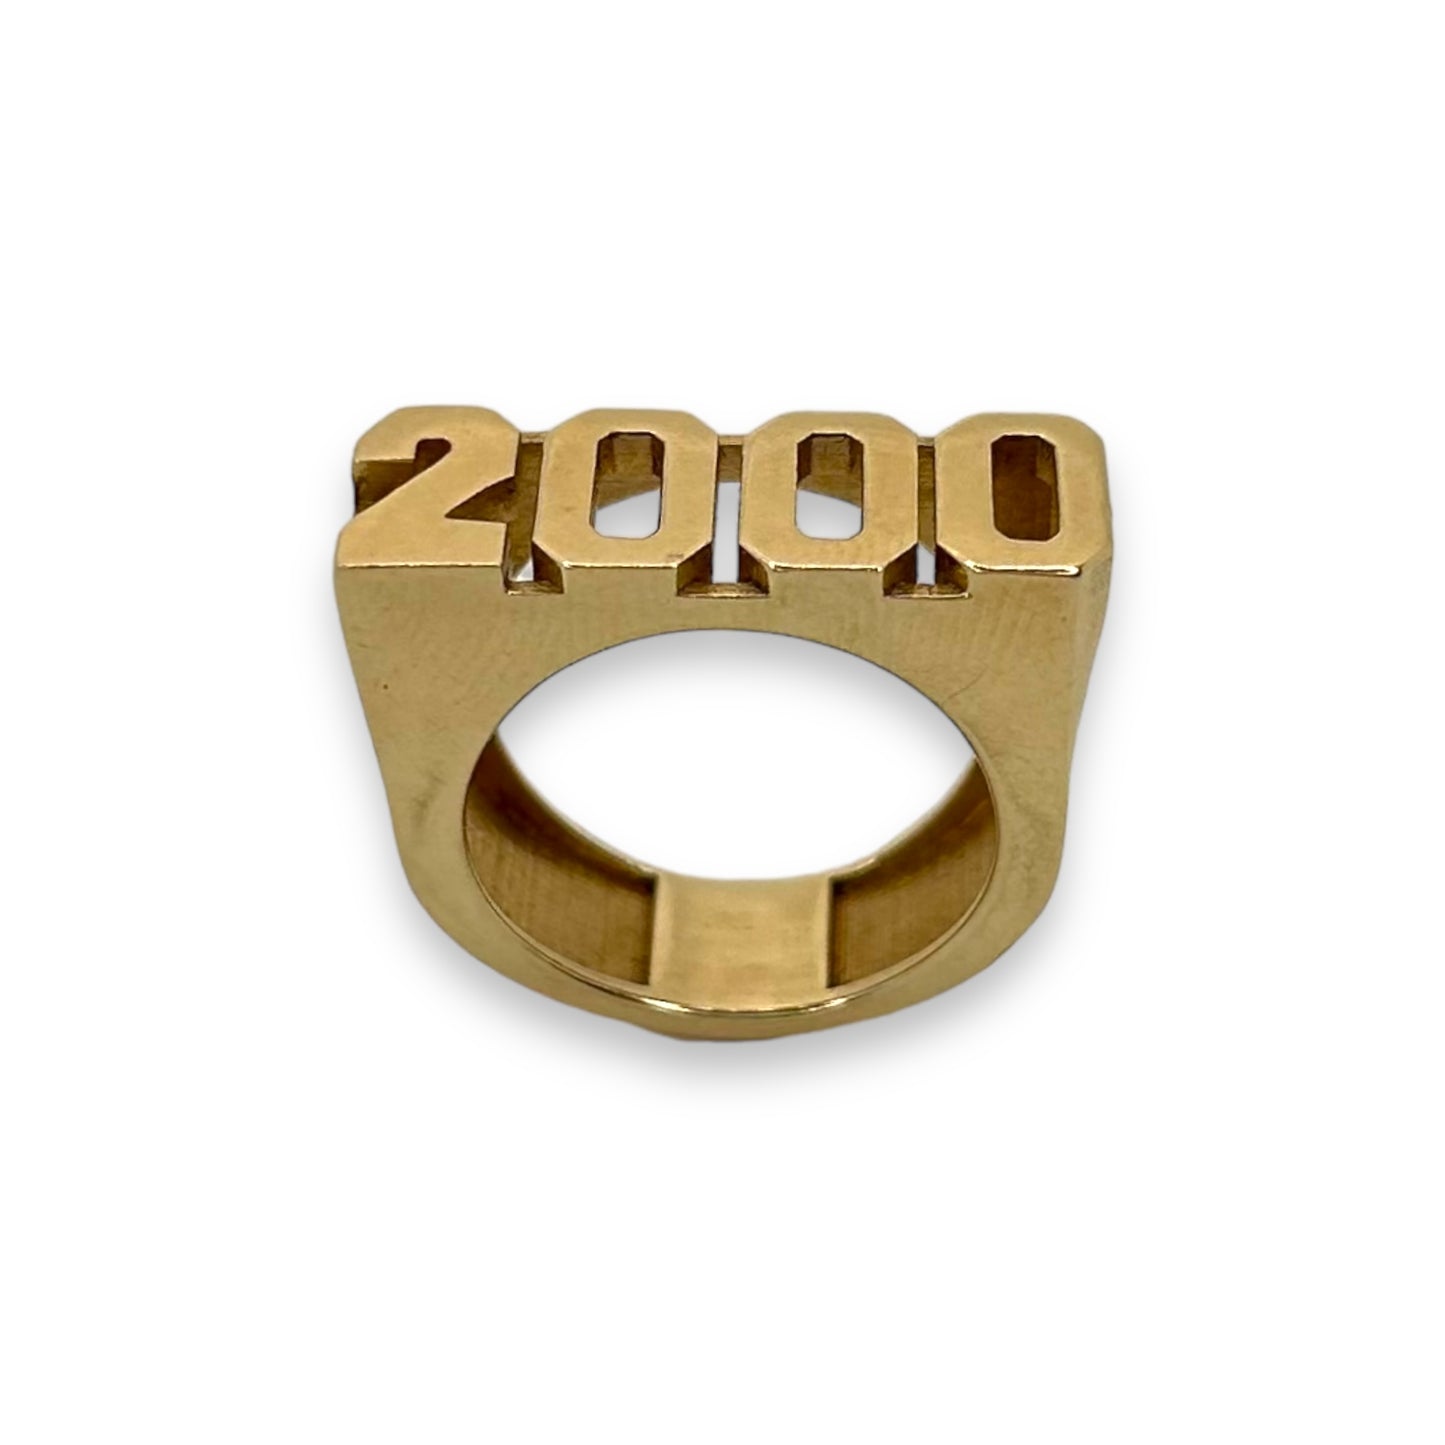 VINTAGE '2000' CUT OUT RING